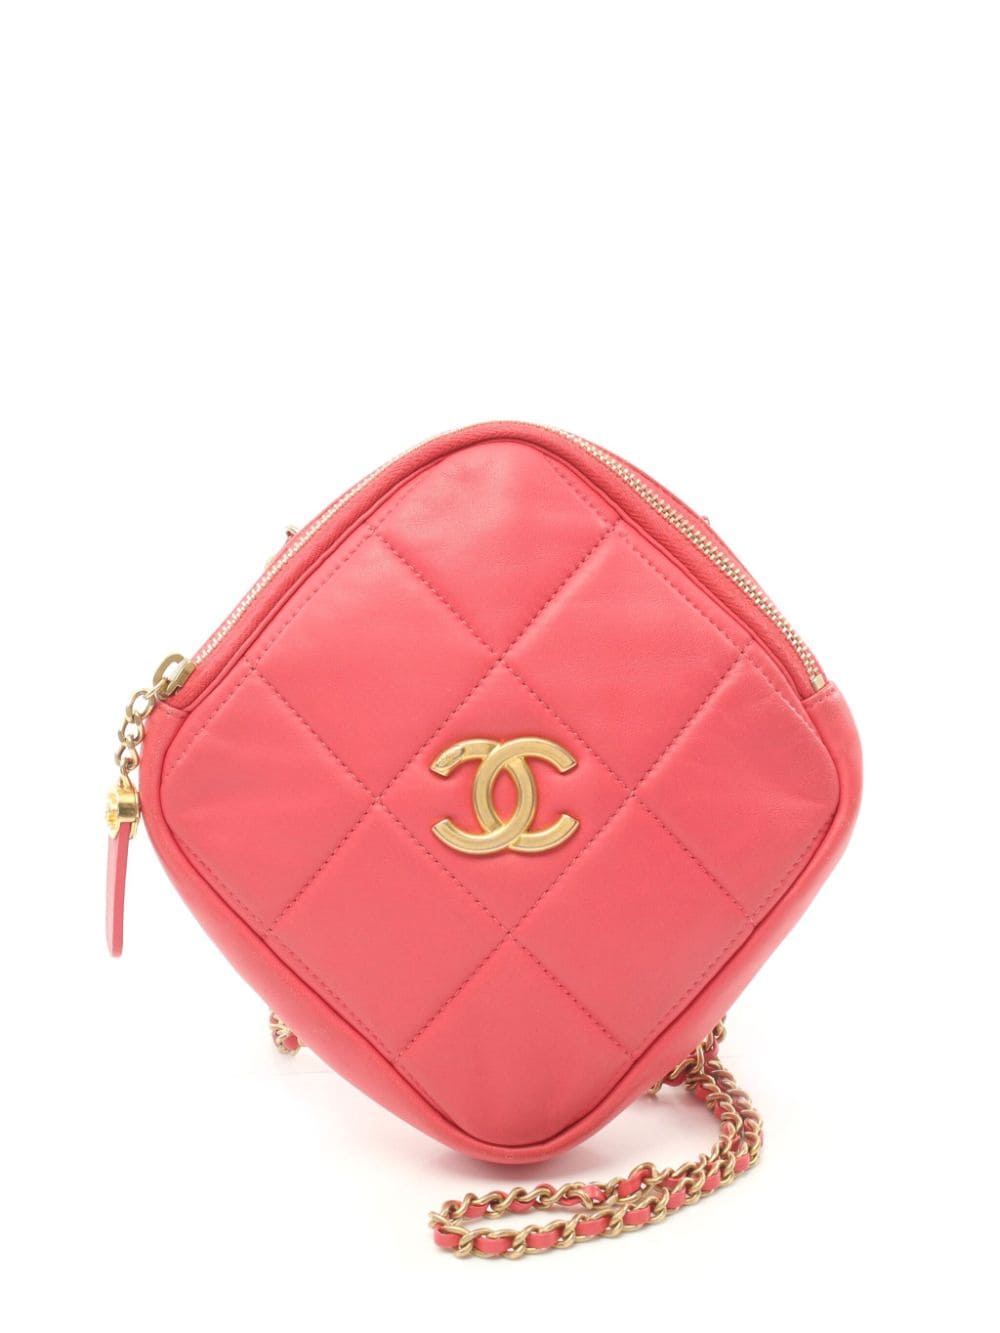 Pre-owned Chanel 2020-2021 Cc Diamond-quilted Shoulder Bag In Pink